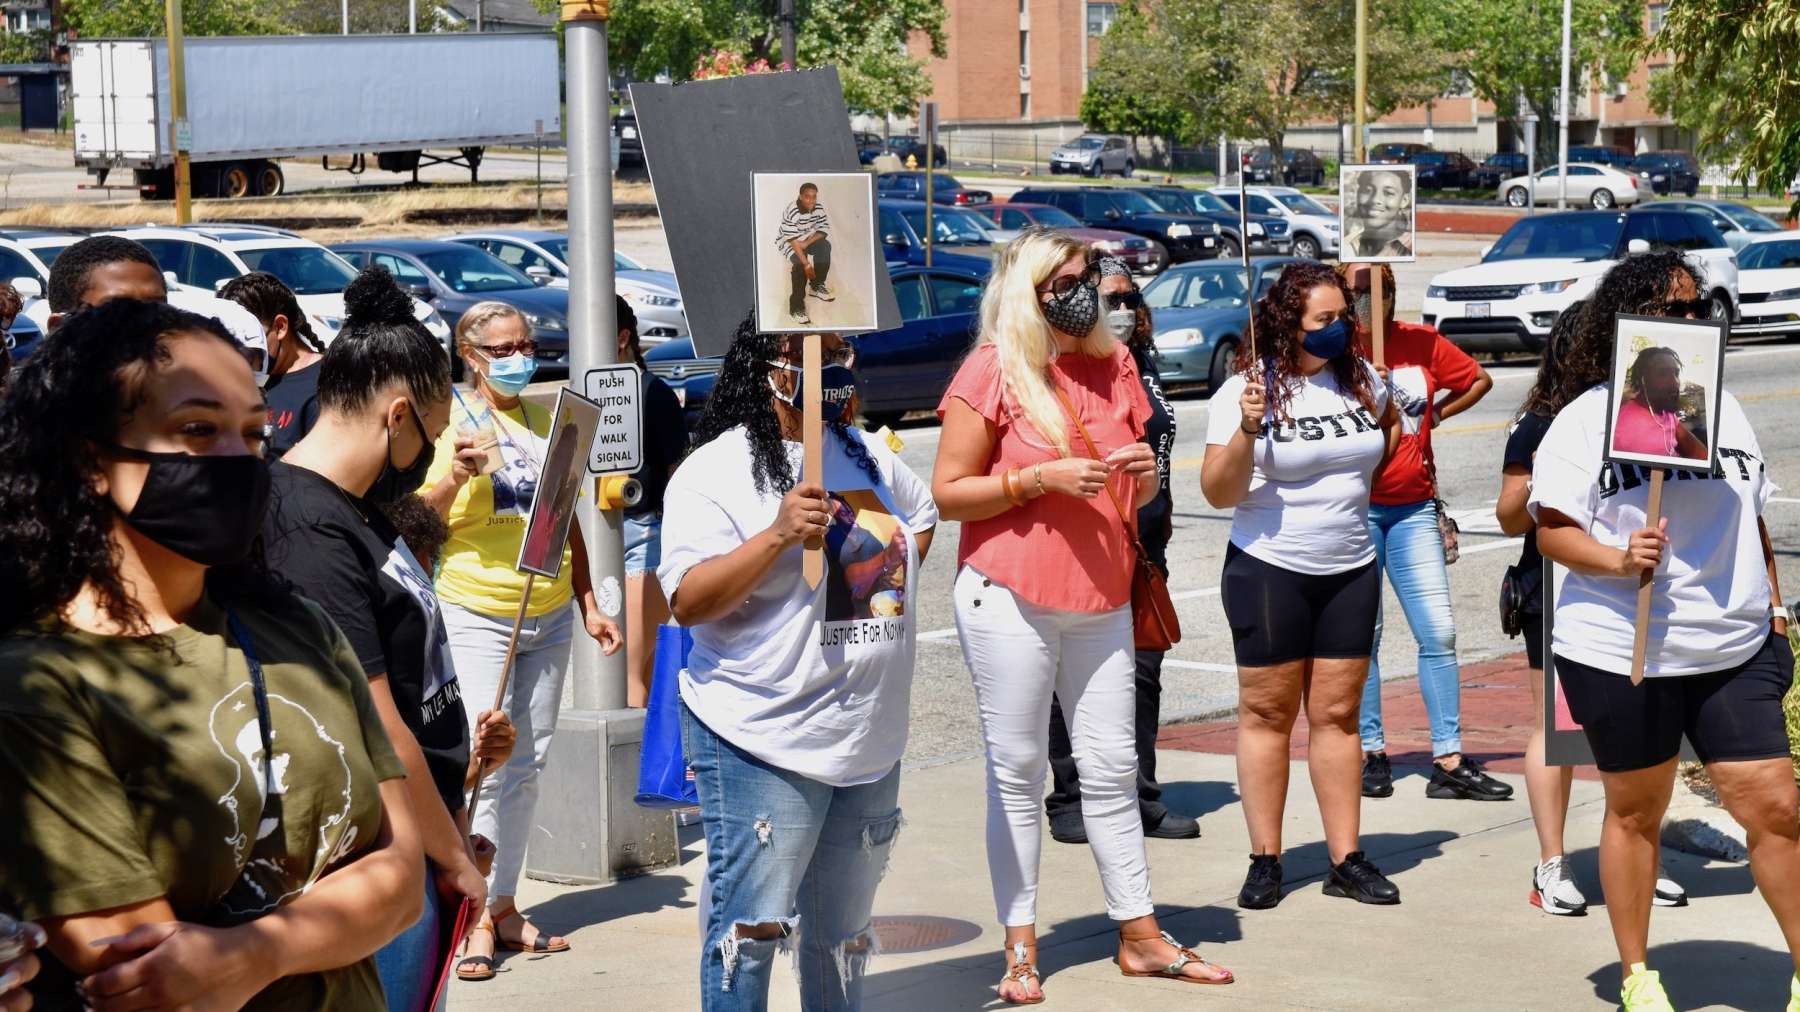 Rhode Island News: Families and community members rally outside Pawtucket Police for accountability and answers